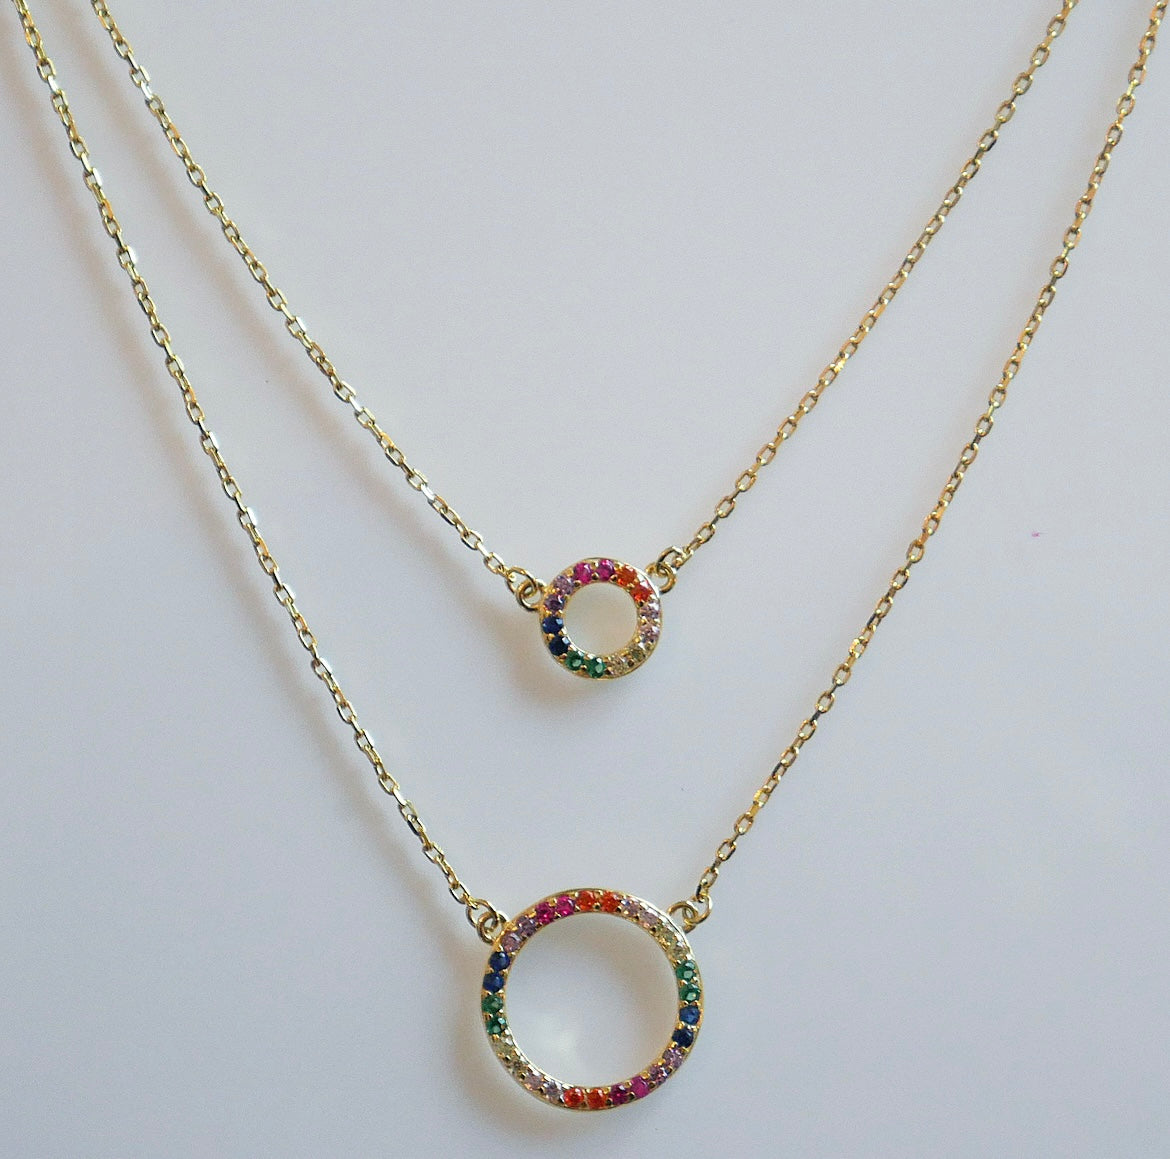 Circle Layered Necklace, 18K Gold Plated .925 Sterling Silver Diamond CZ 2:1 Dainty Necklace